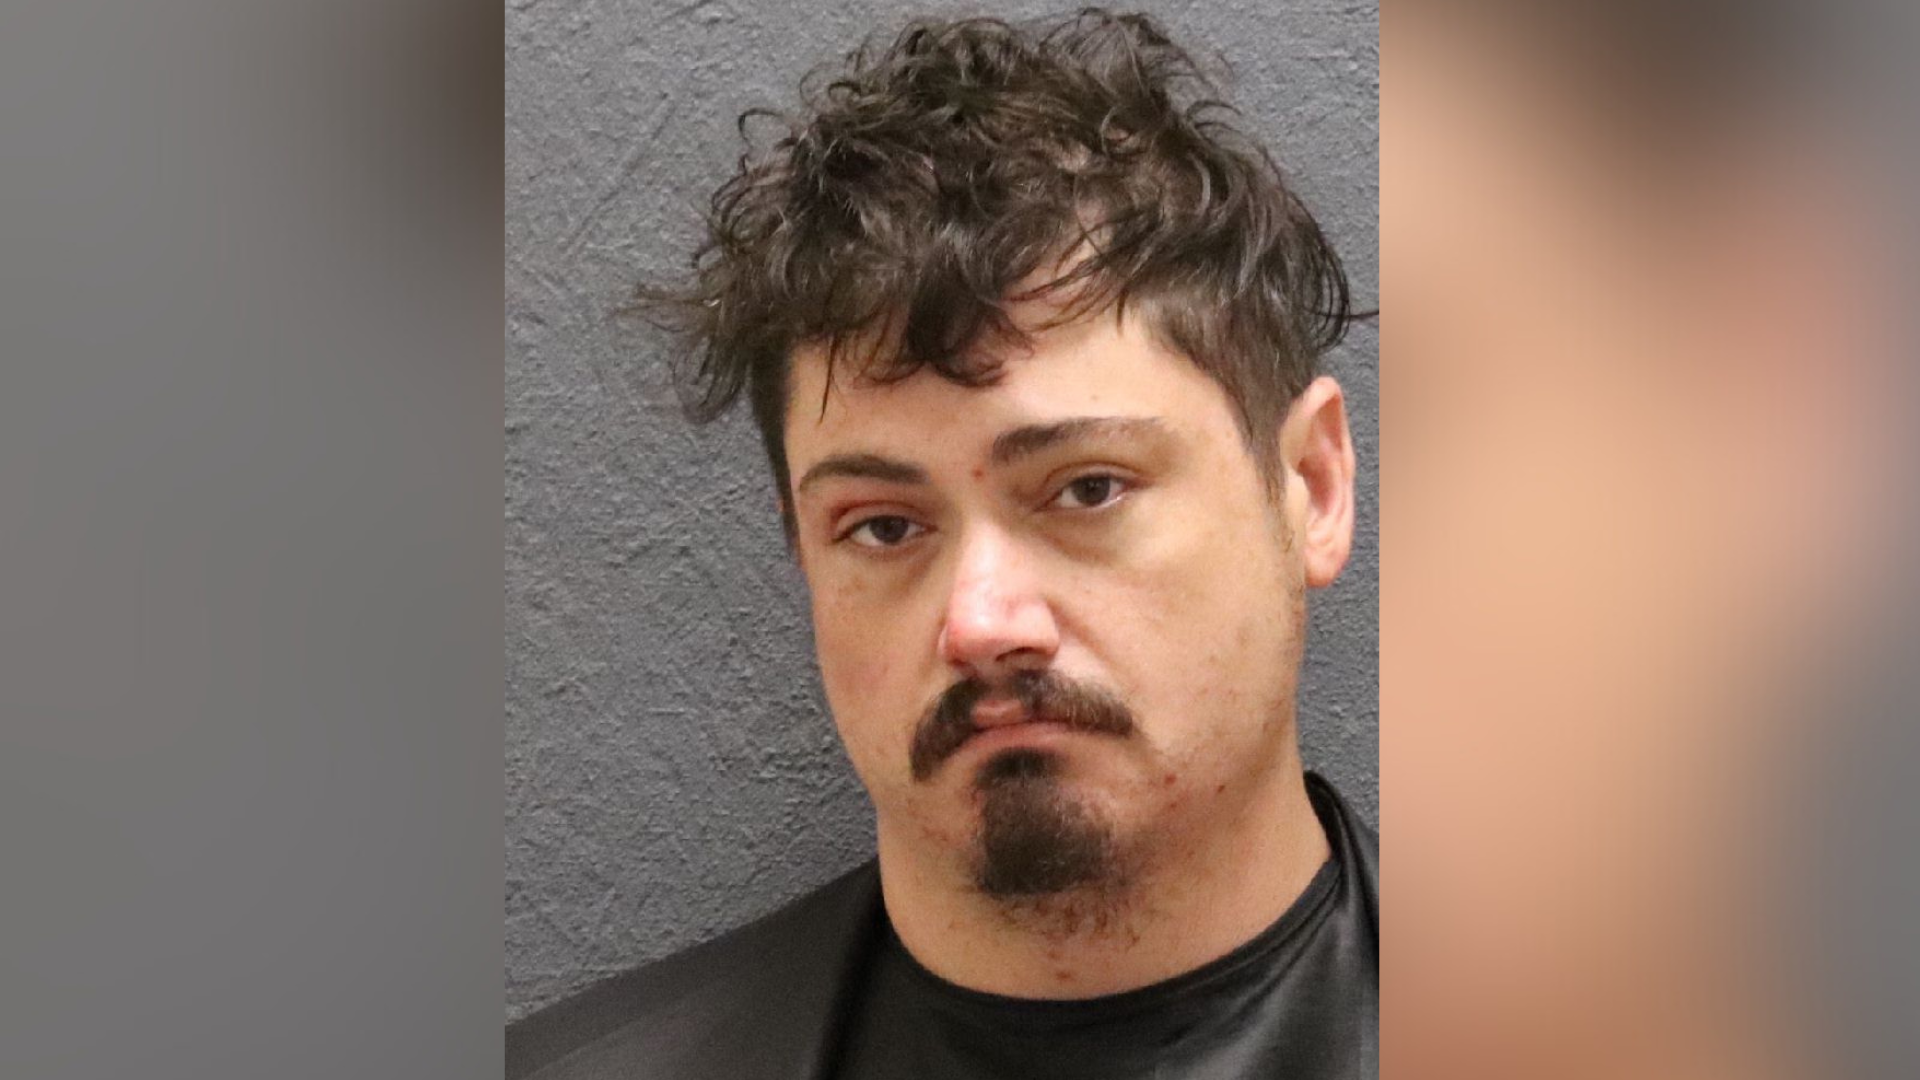 Man arrested after breaking into ex-girlfriends house and sexually assaulting